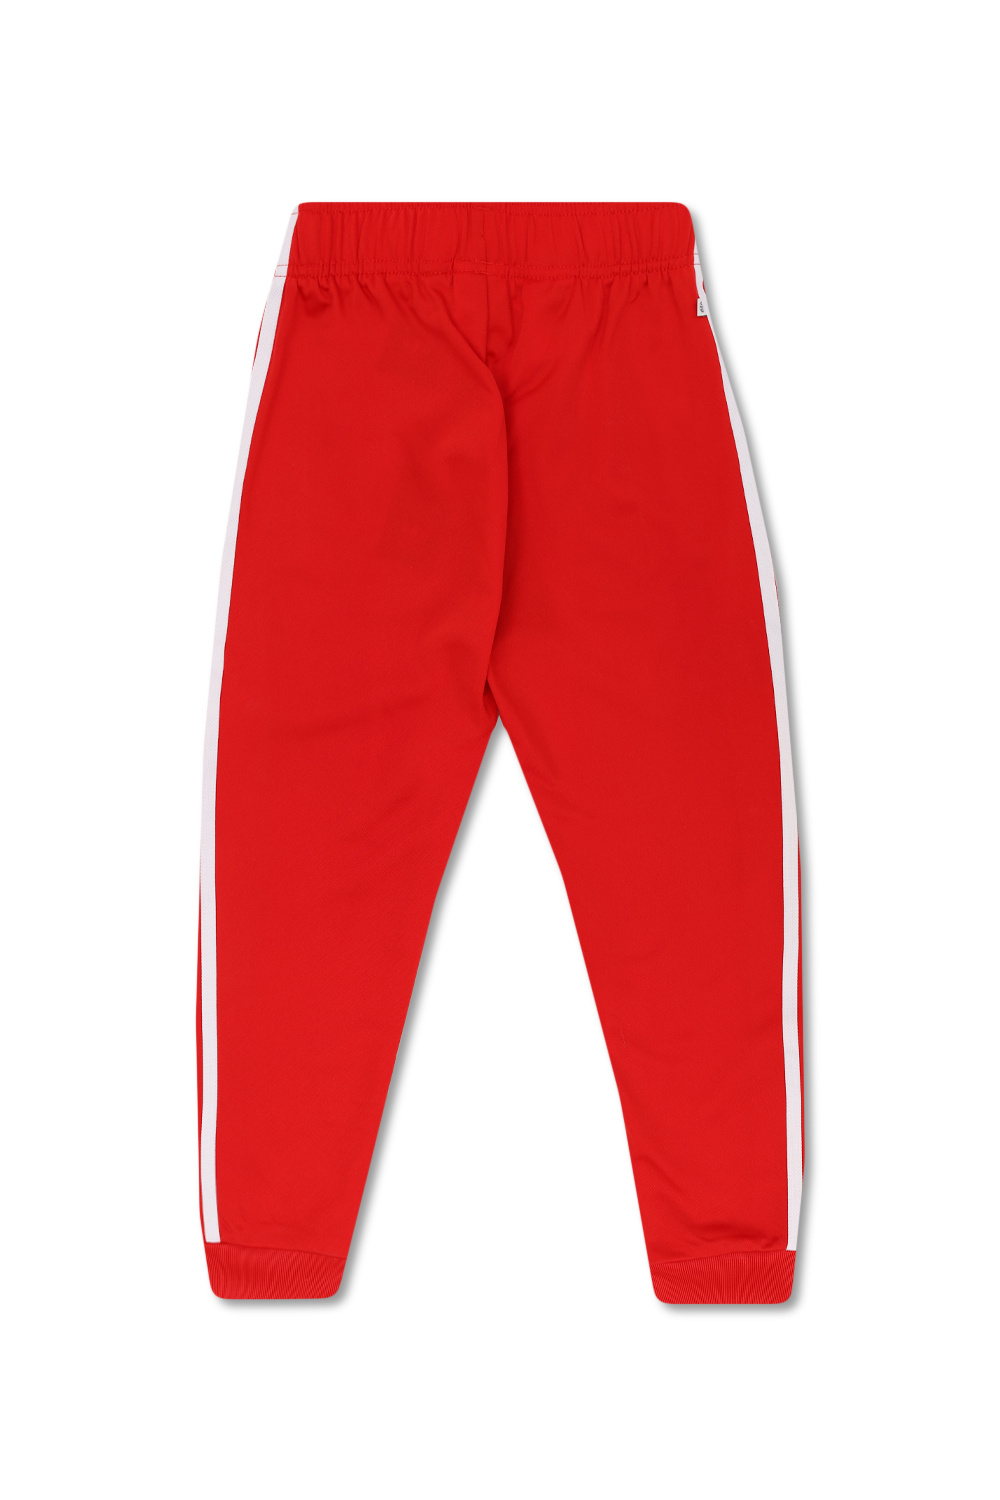 adidas More Kids Trousers with logo